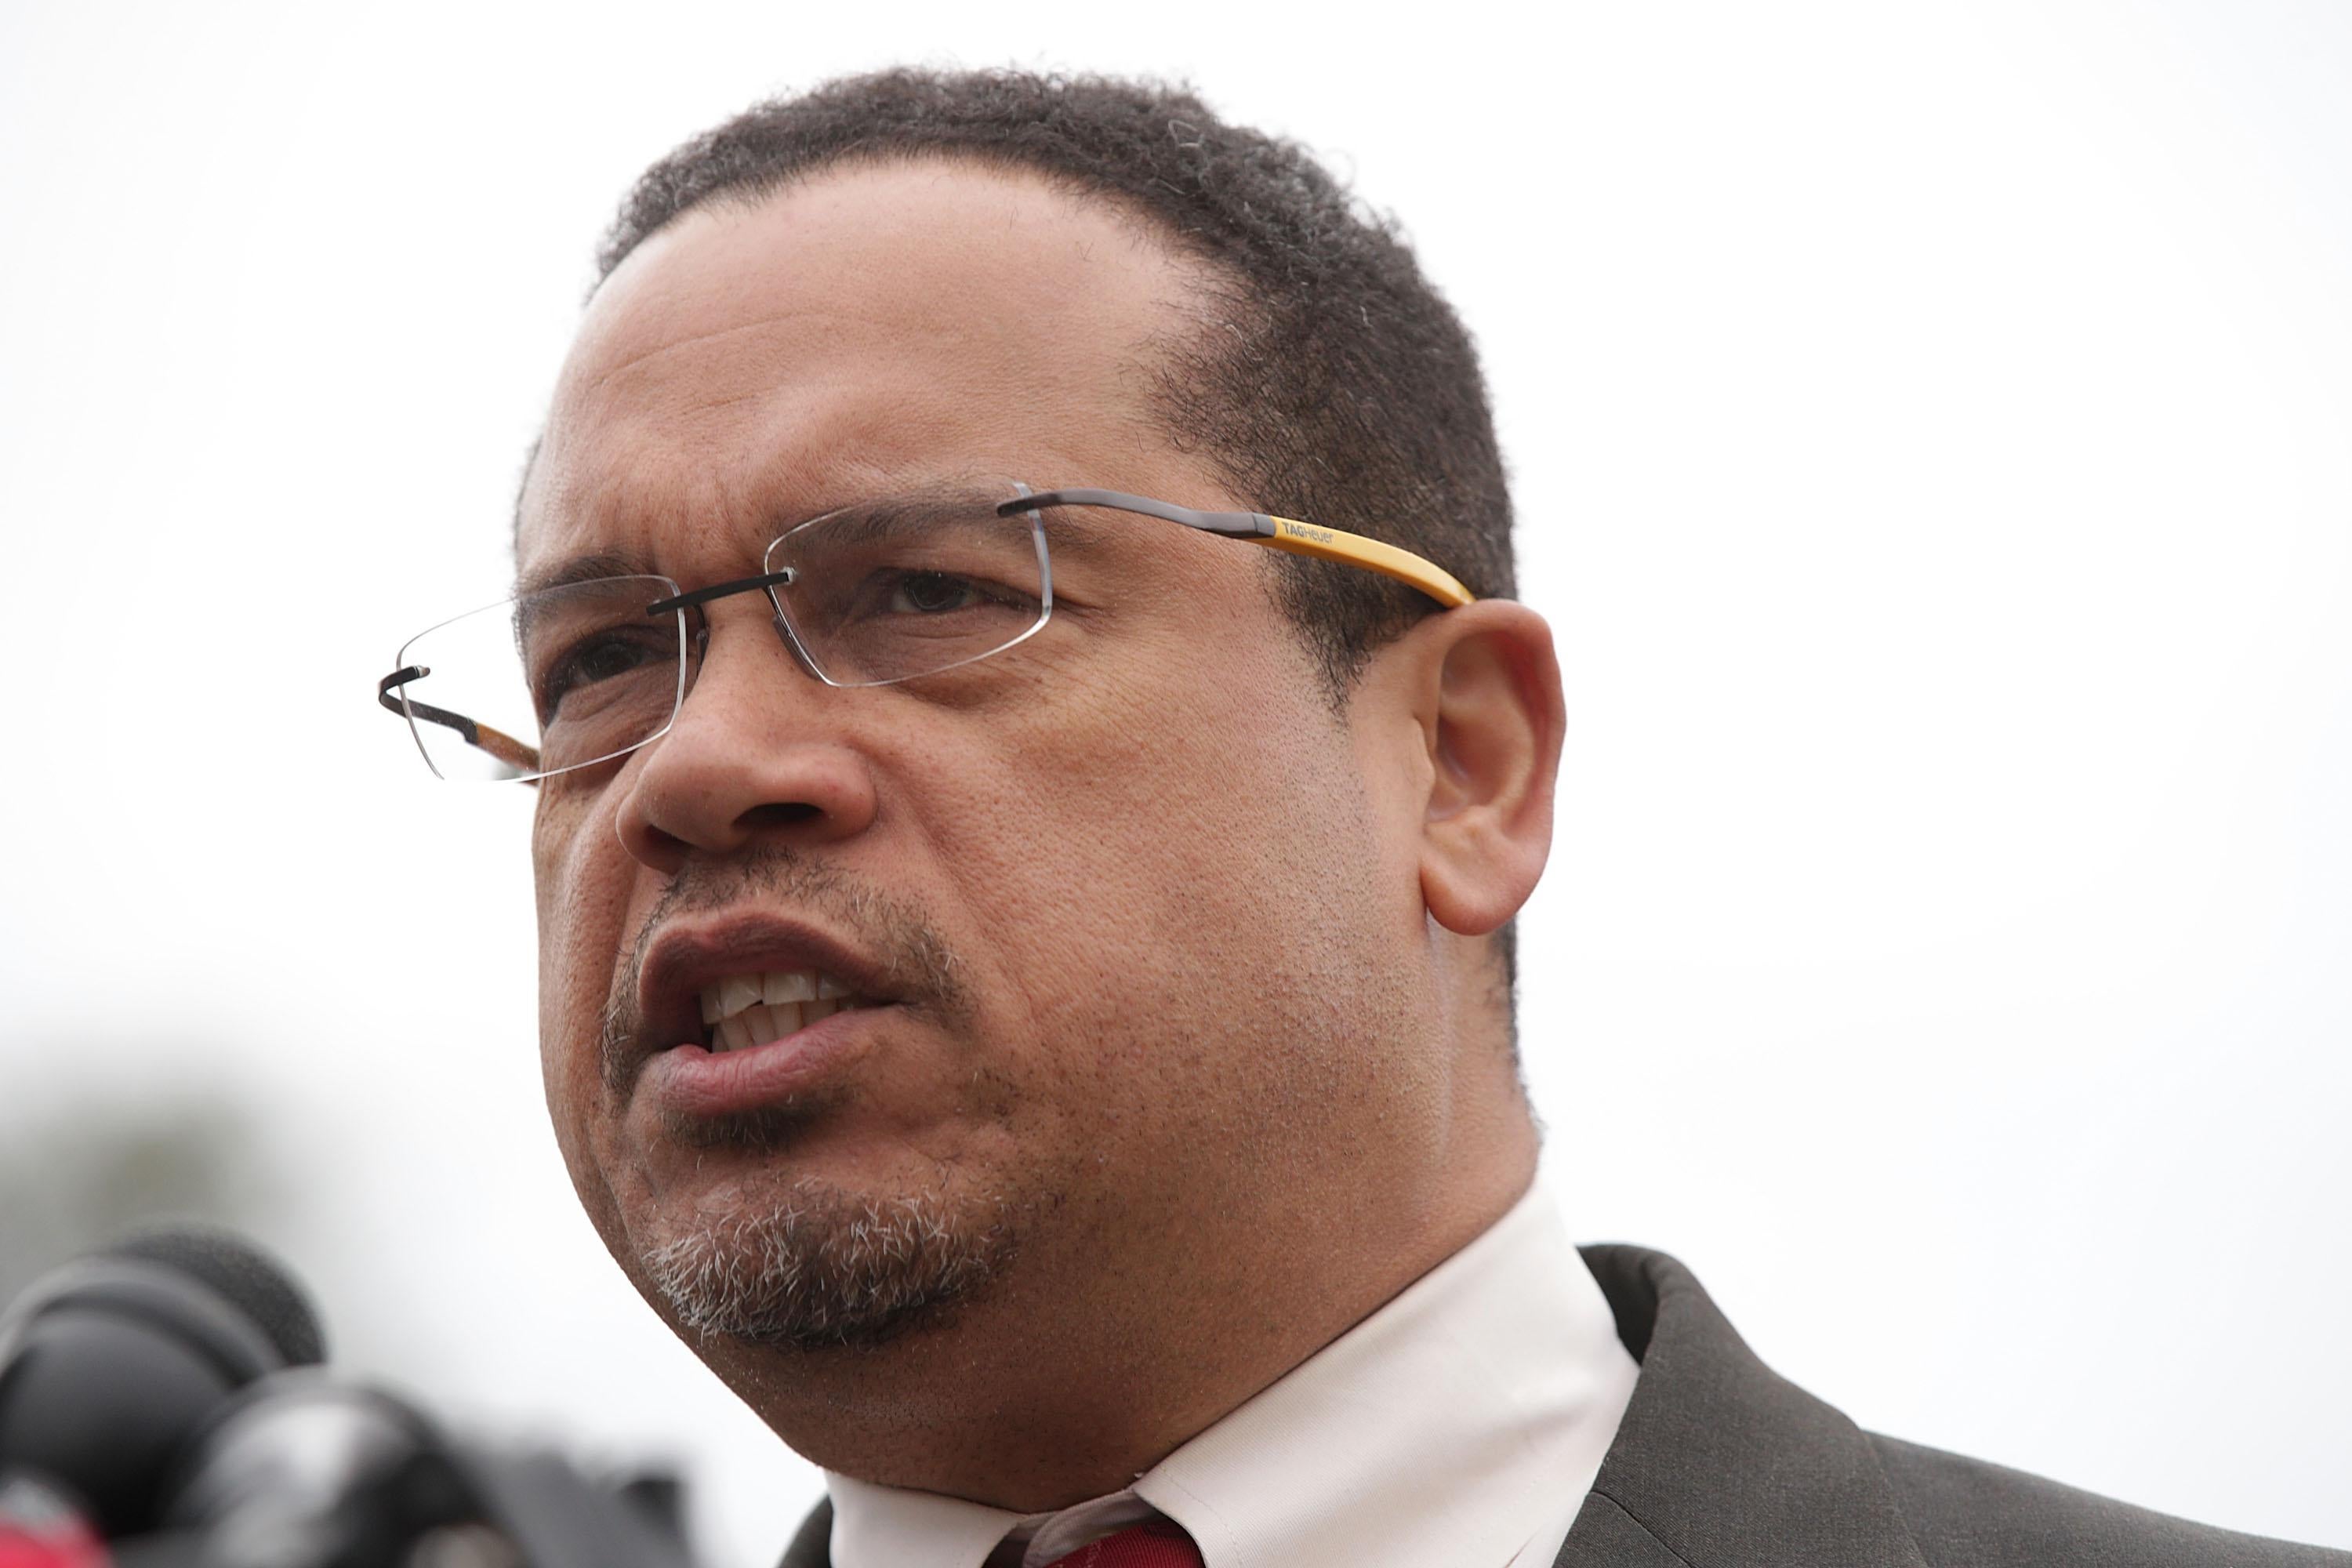 Keith Ellison speaks at a podium with microphones outside.